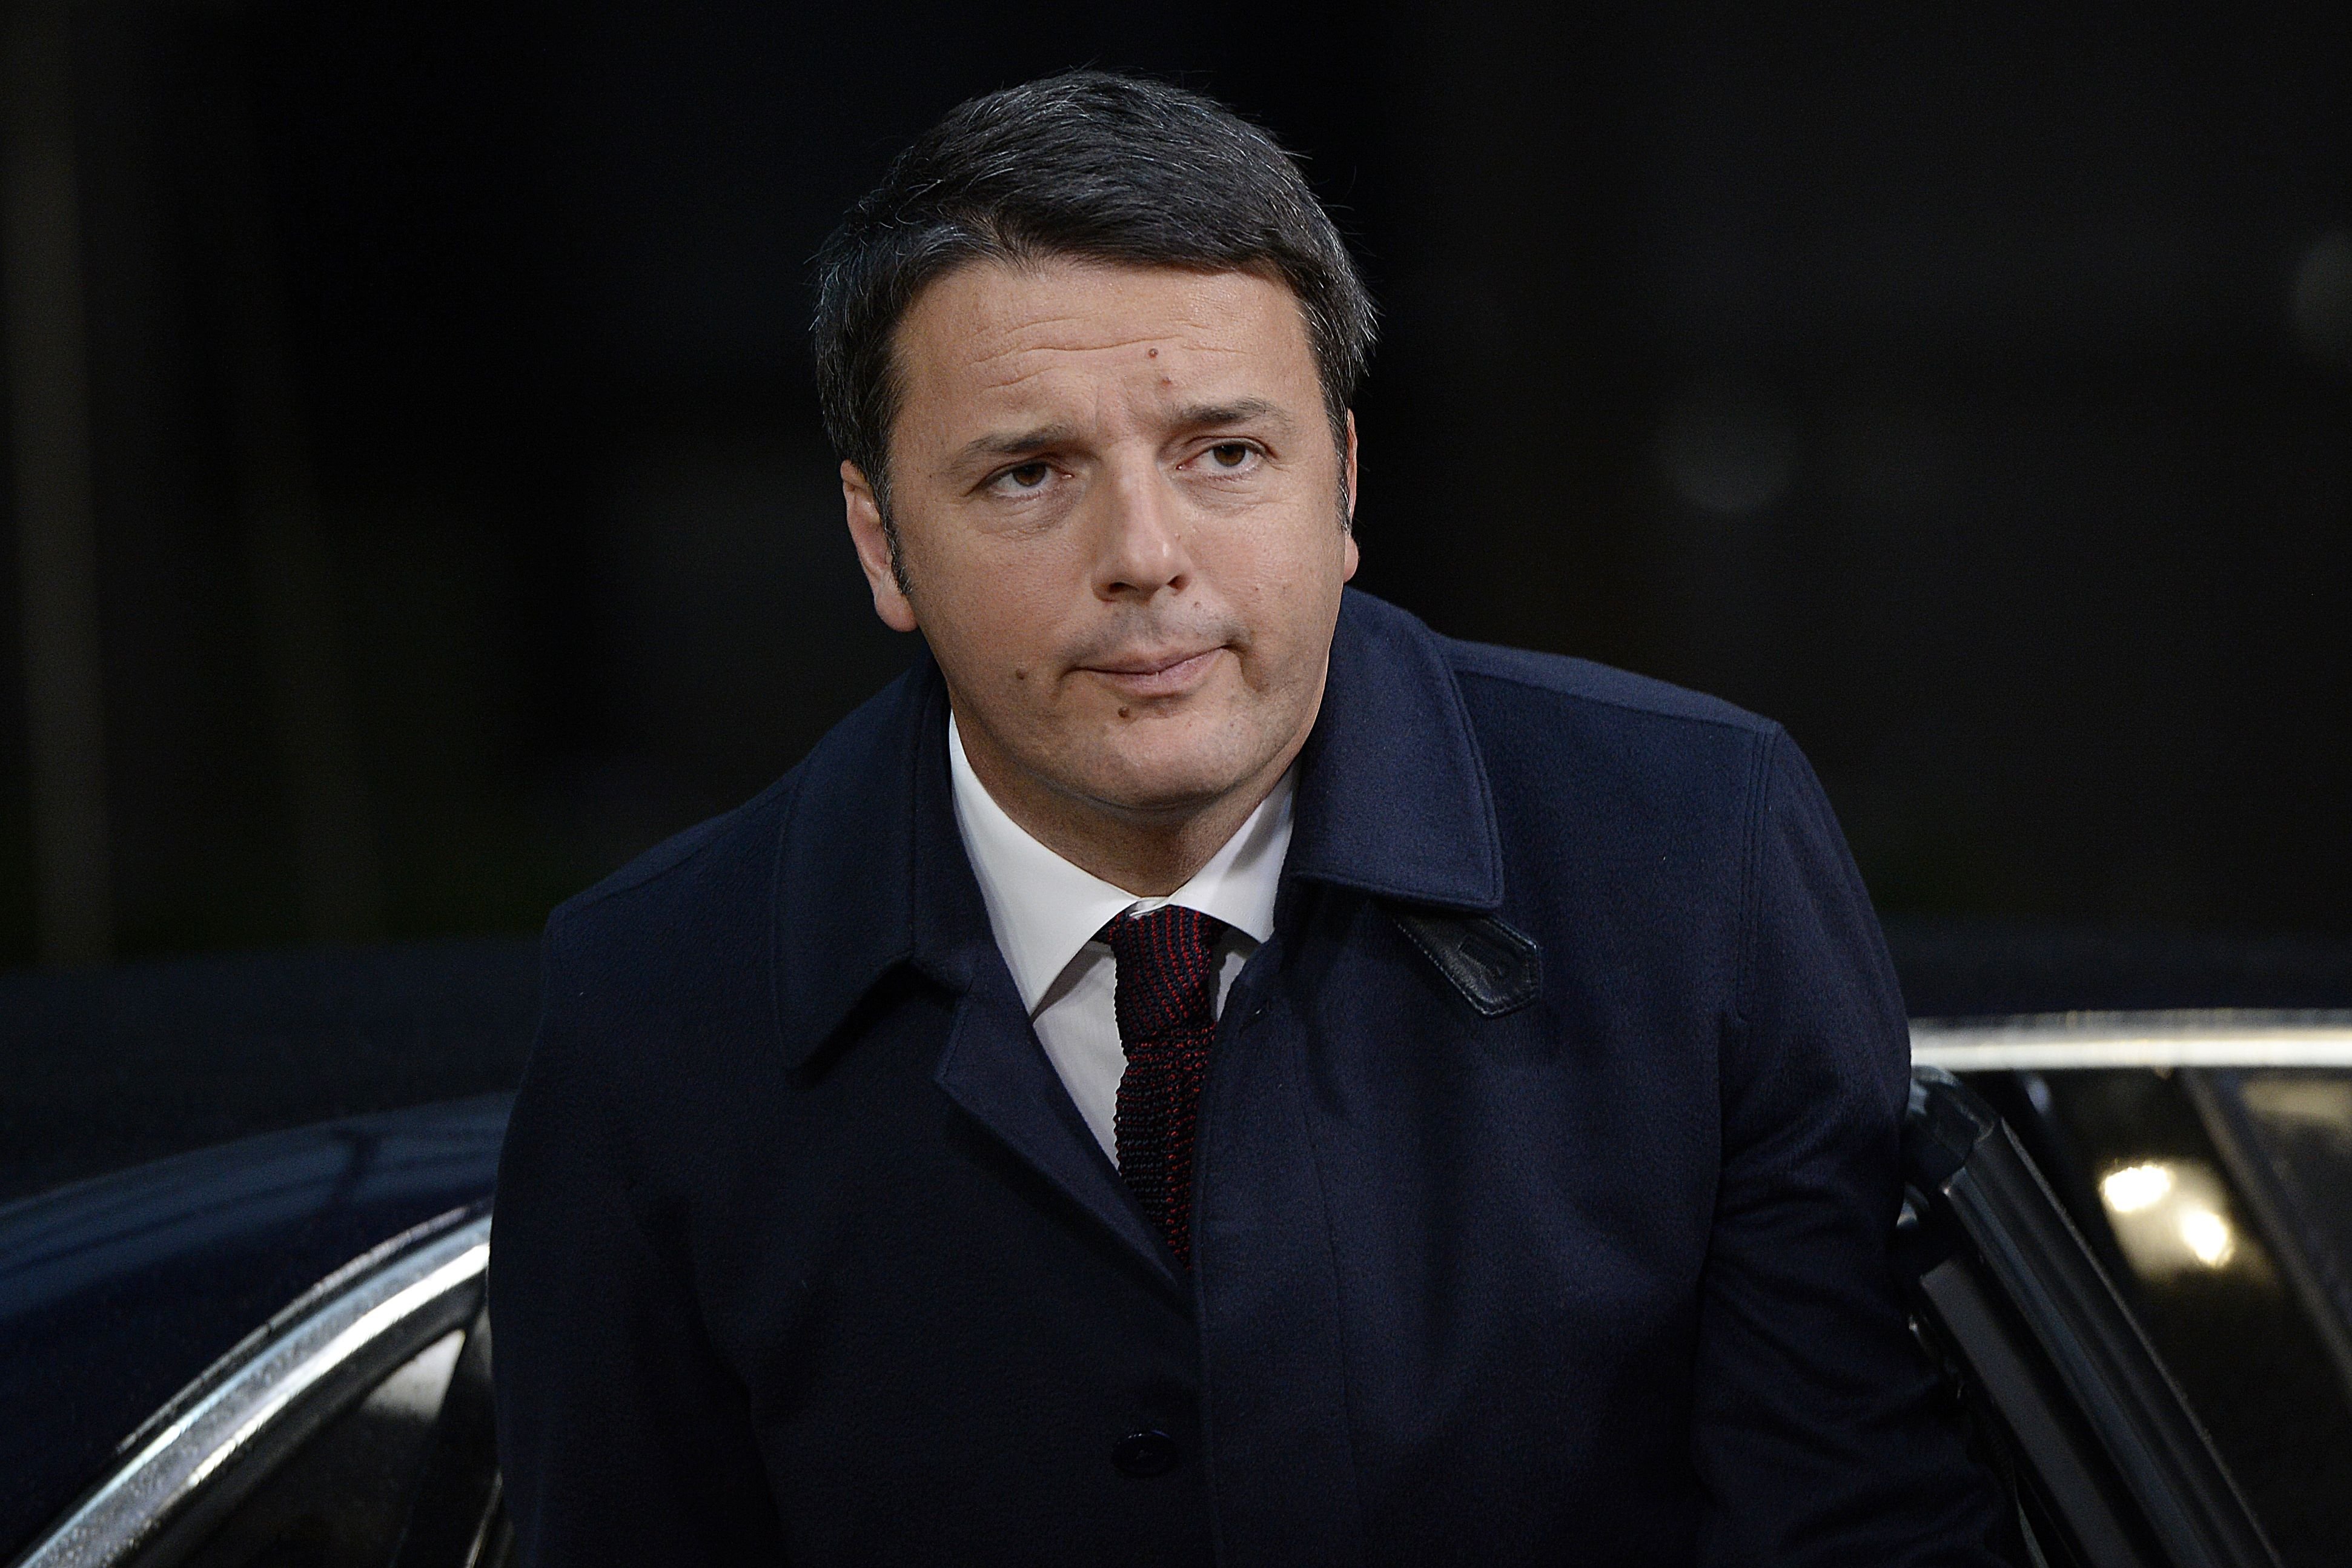 Italy's Prime minister Matteo Renzi at the EU headquarters in Brussels on Nov. 29, 2015. (Thierry Charlier—AFP/Getty Images)